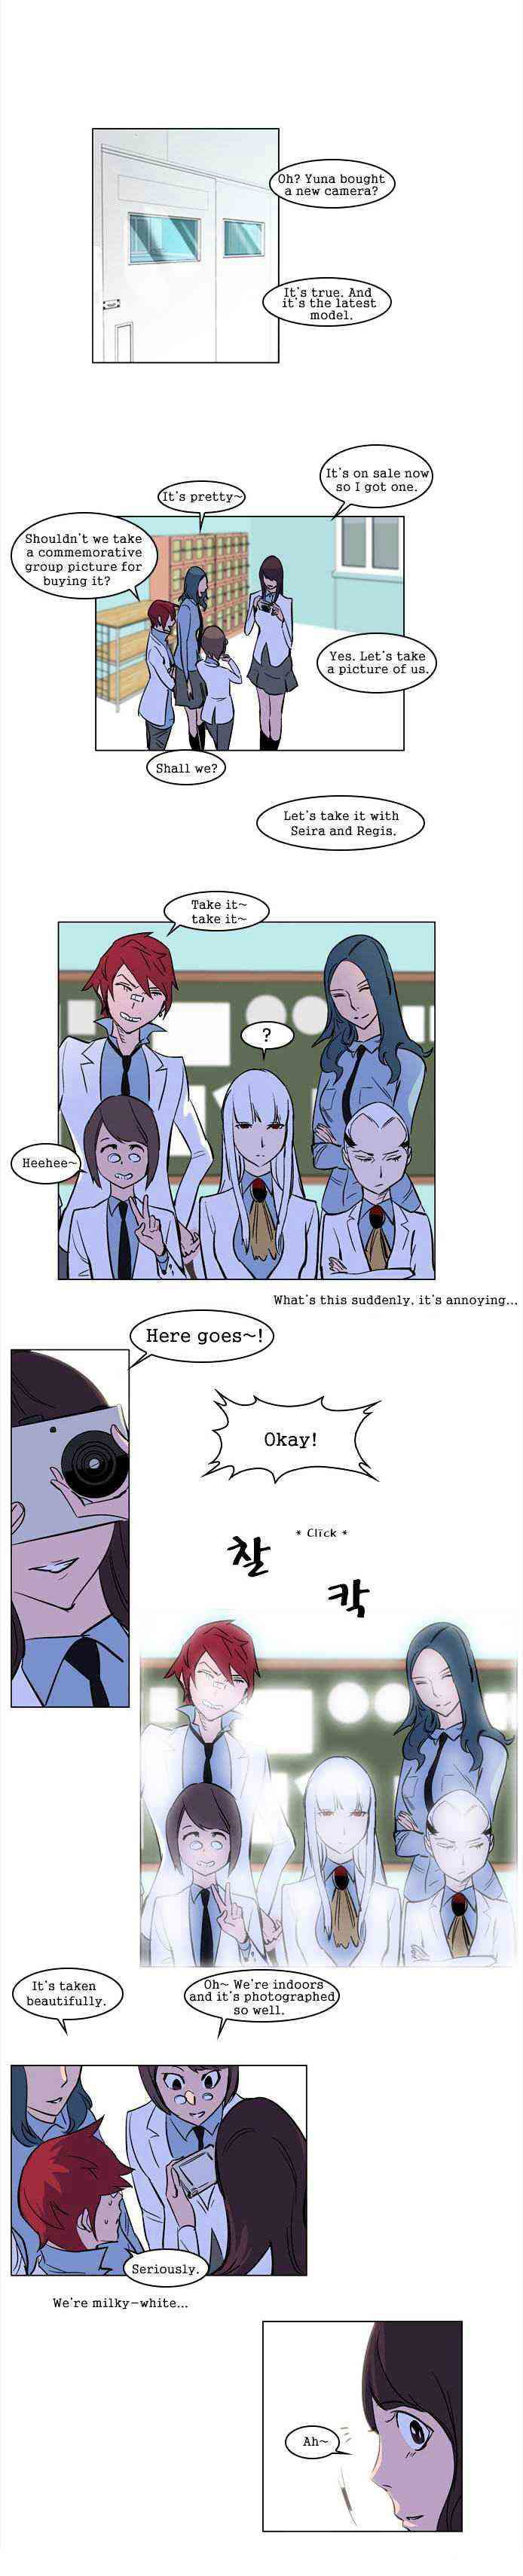 Noblesse Chapter 171.5 _ Attention Please. Note 06. Photogr page 2